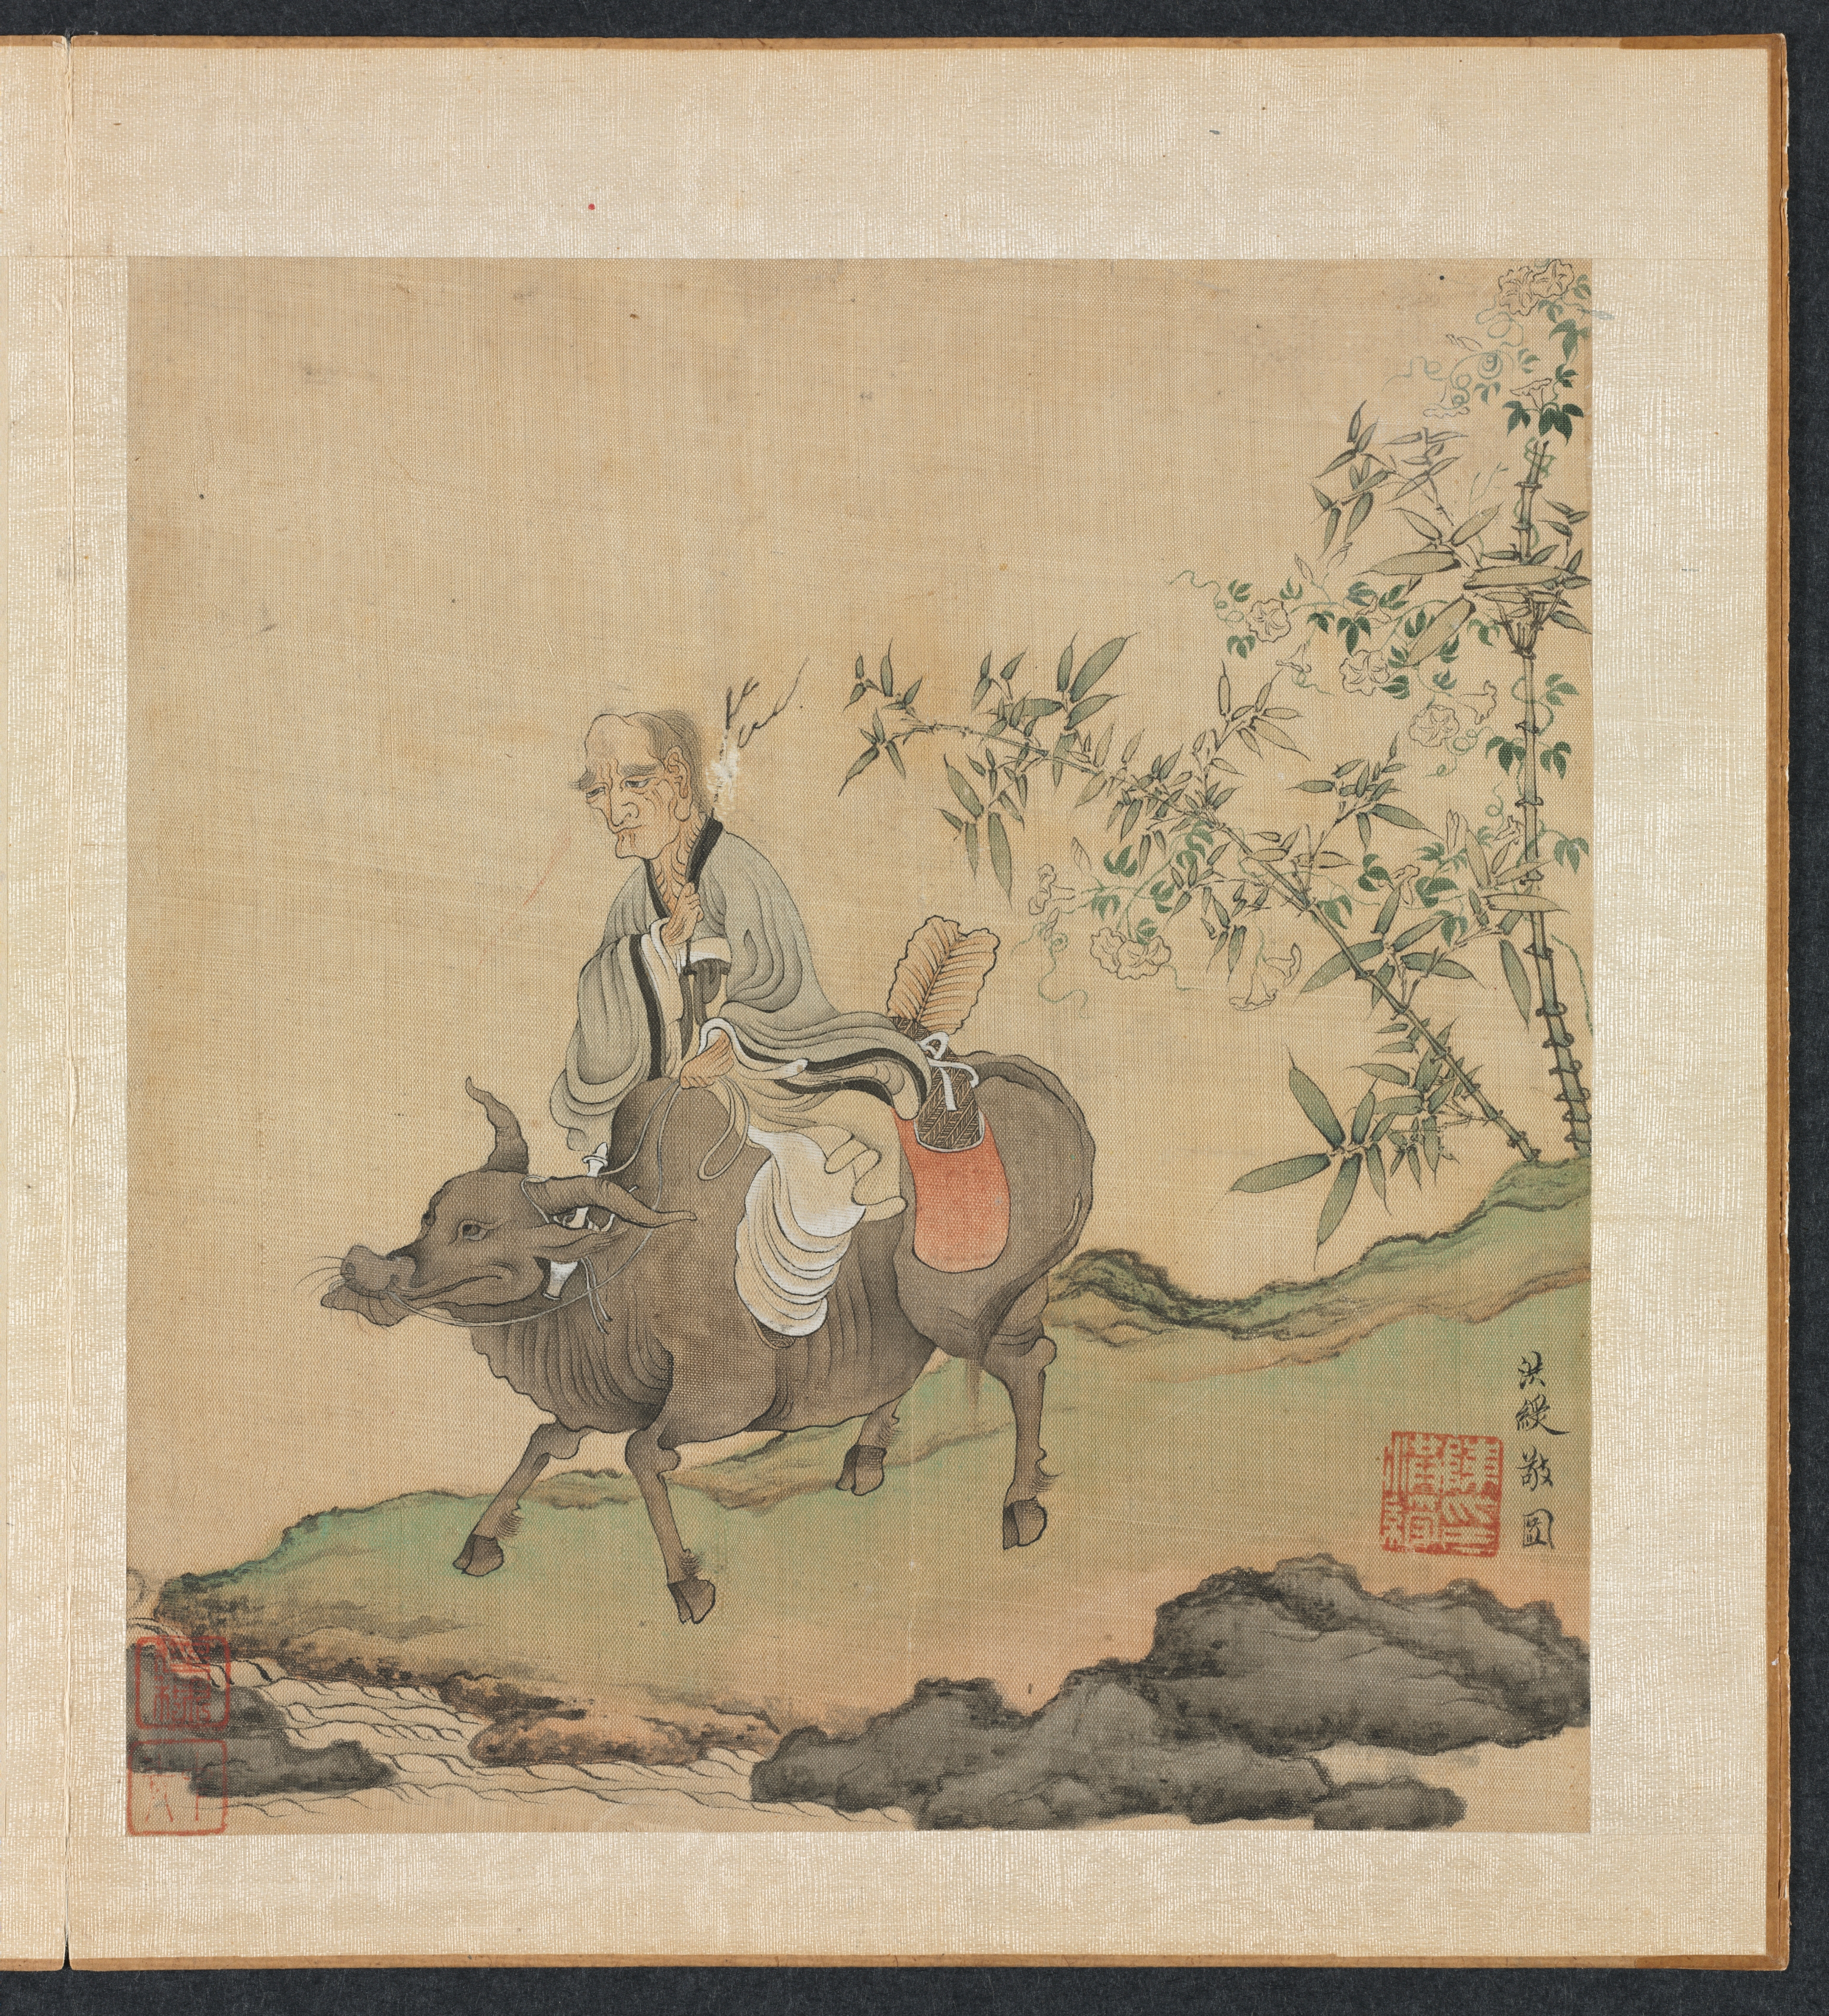 Paintings after Ancient Masters: Laozi Riding an Ox